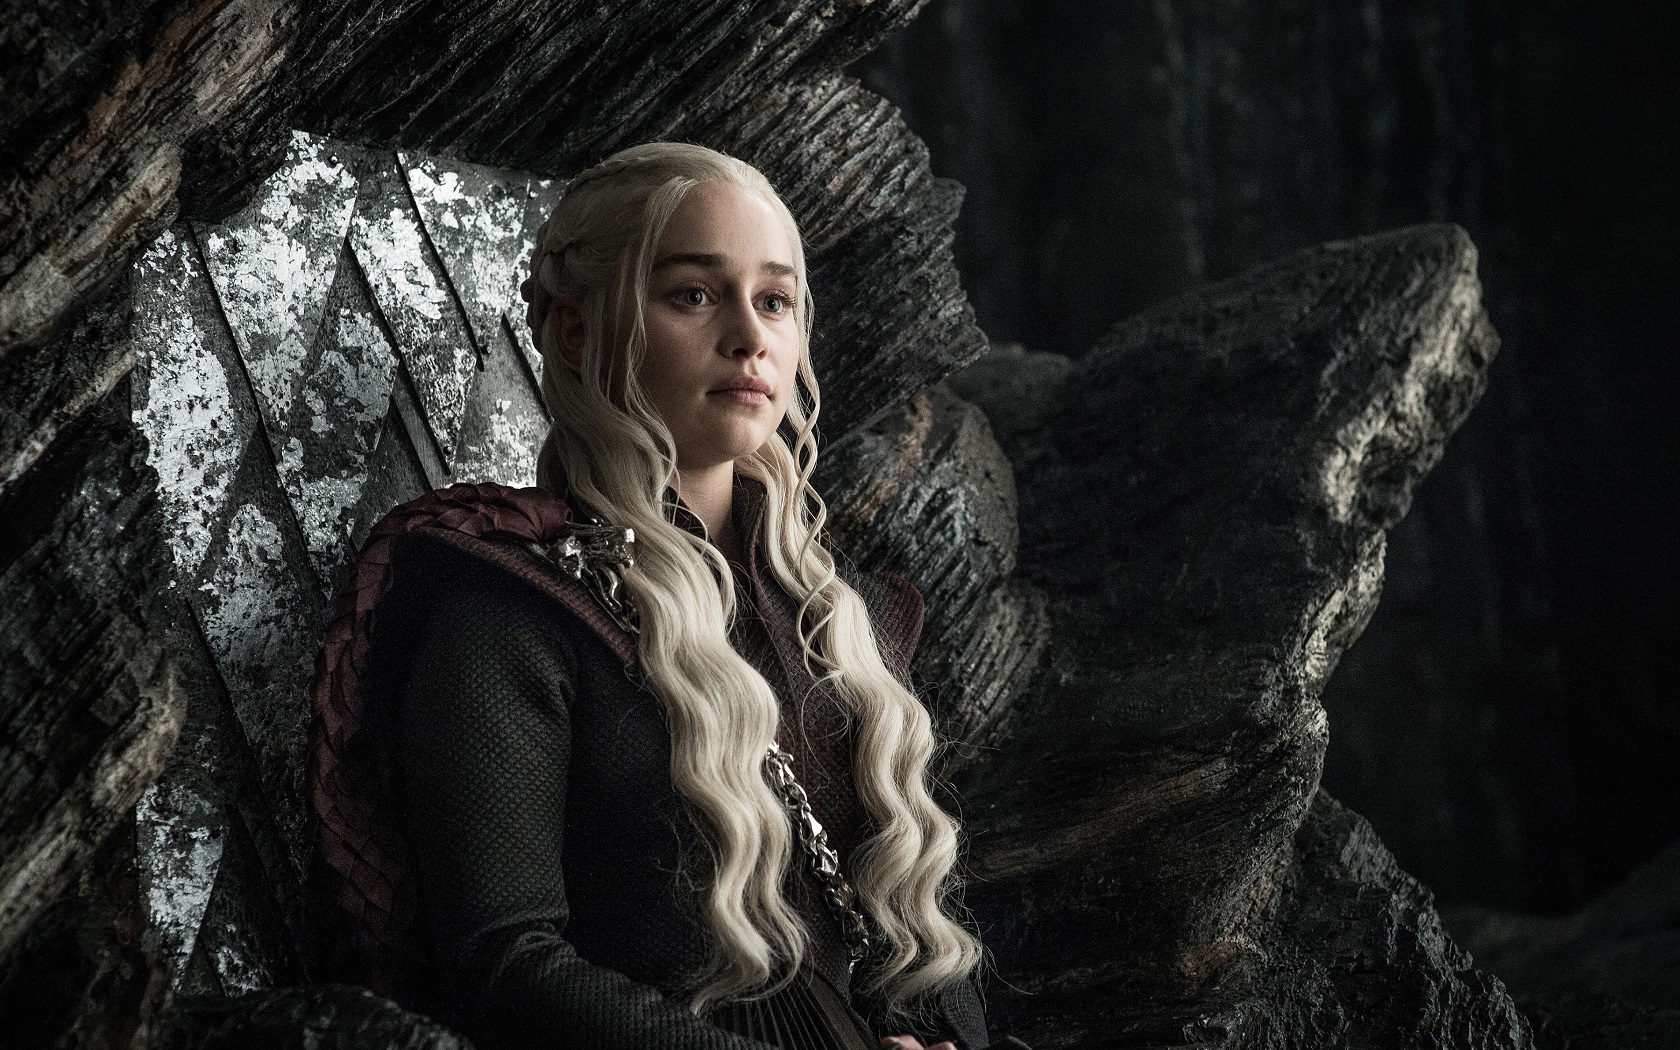 The Game Of Thrones touring exhibition is coming to Ireland